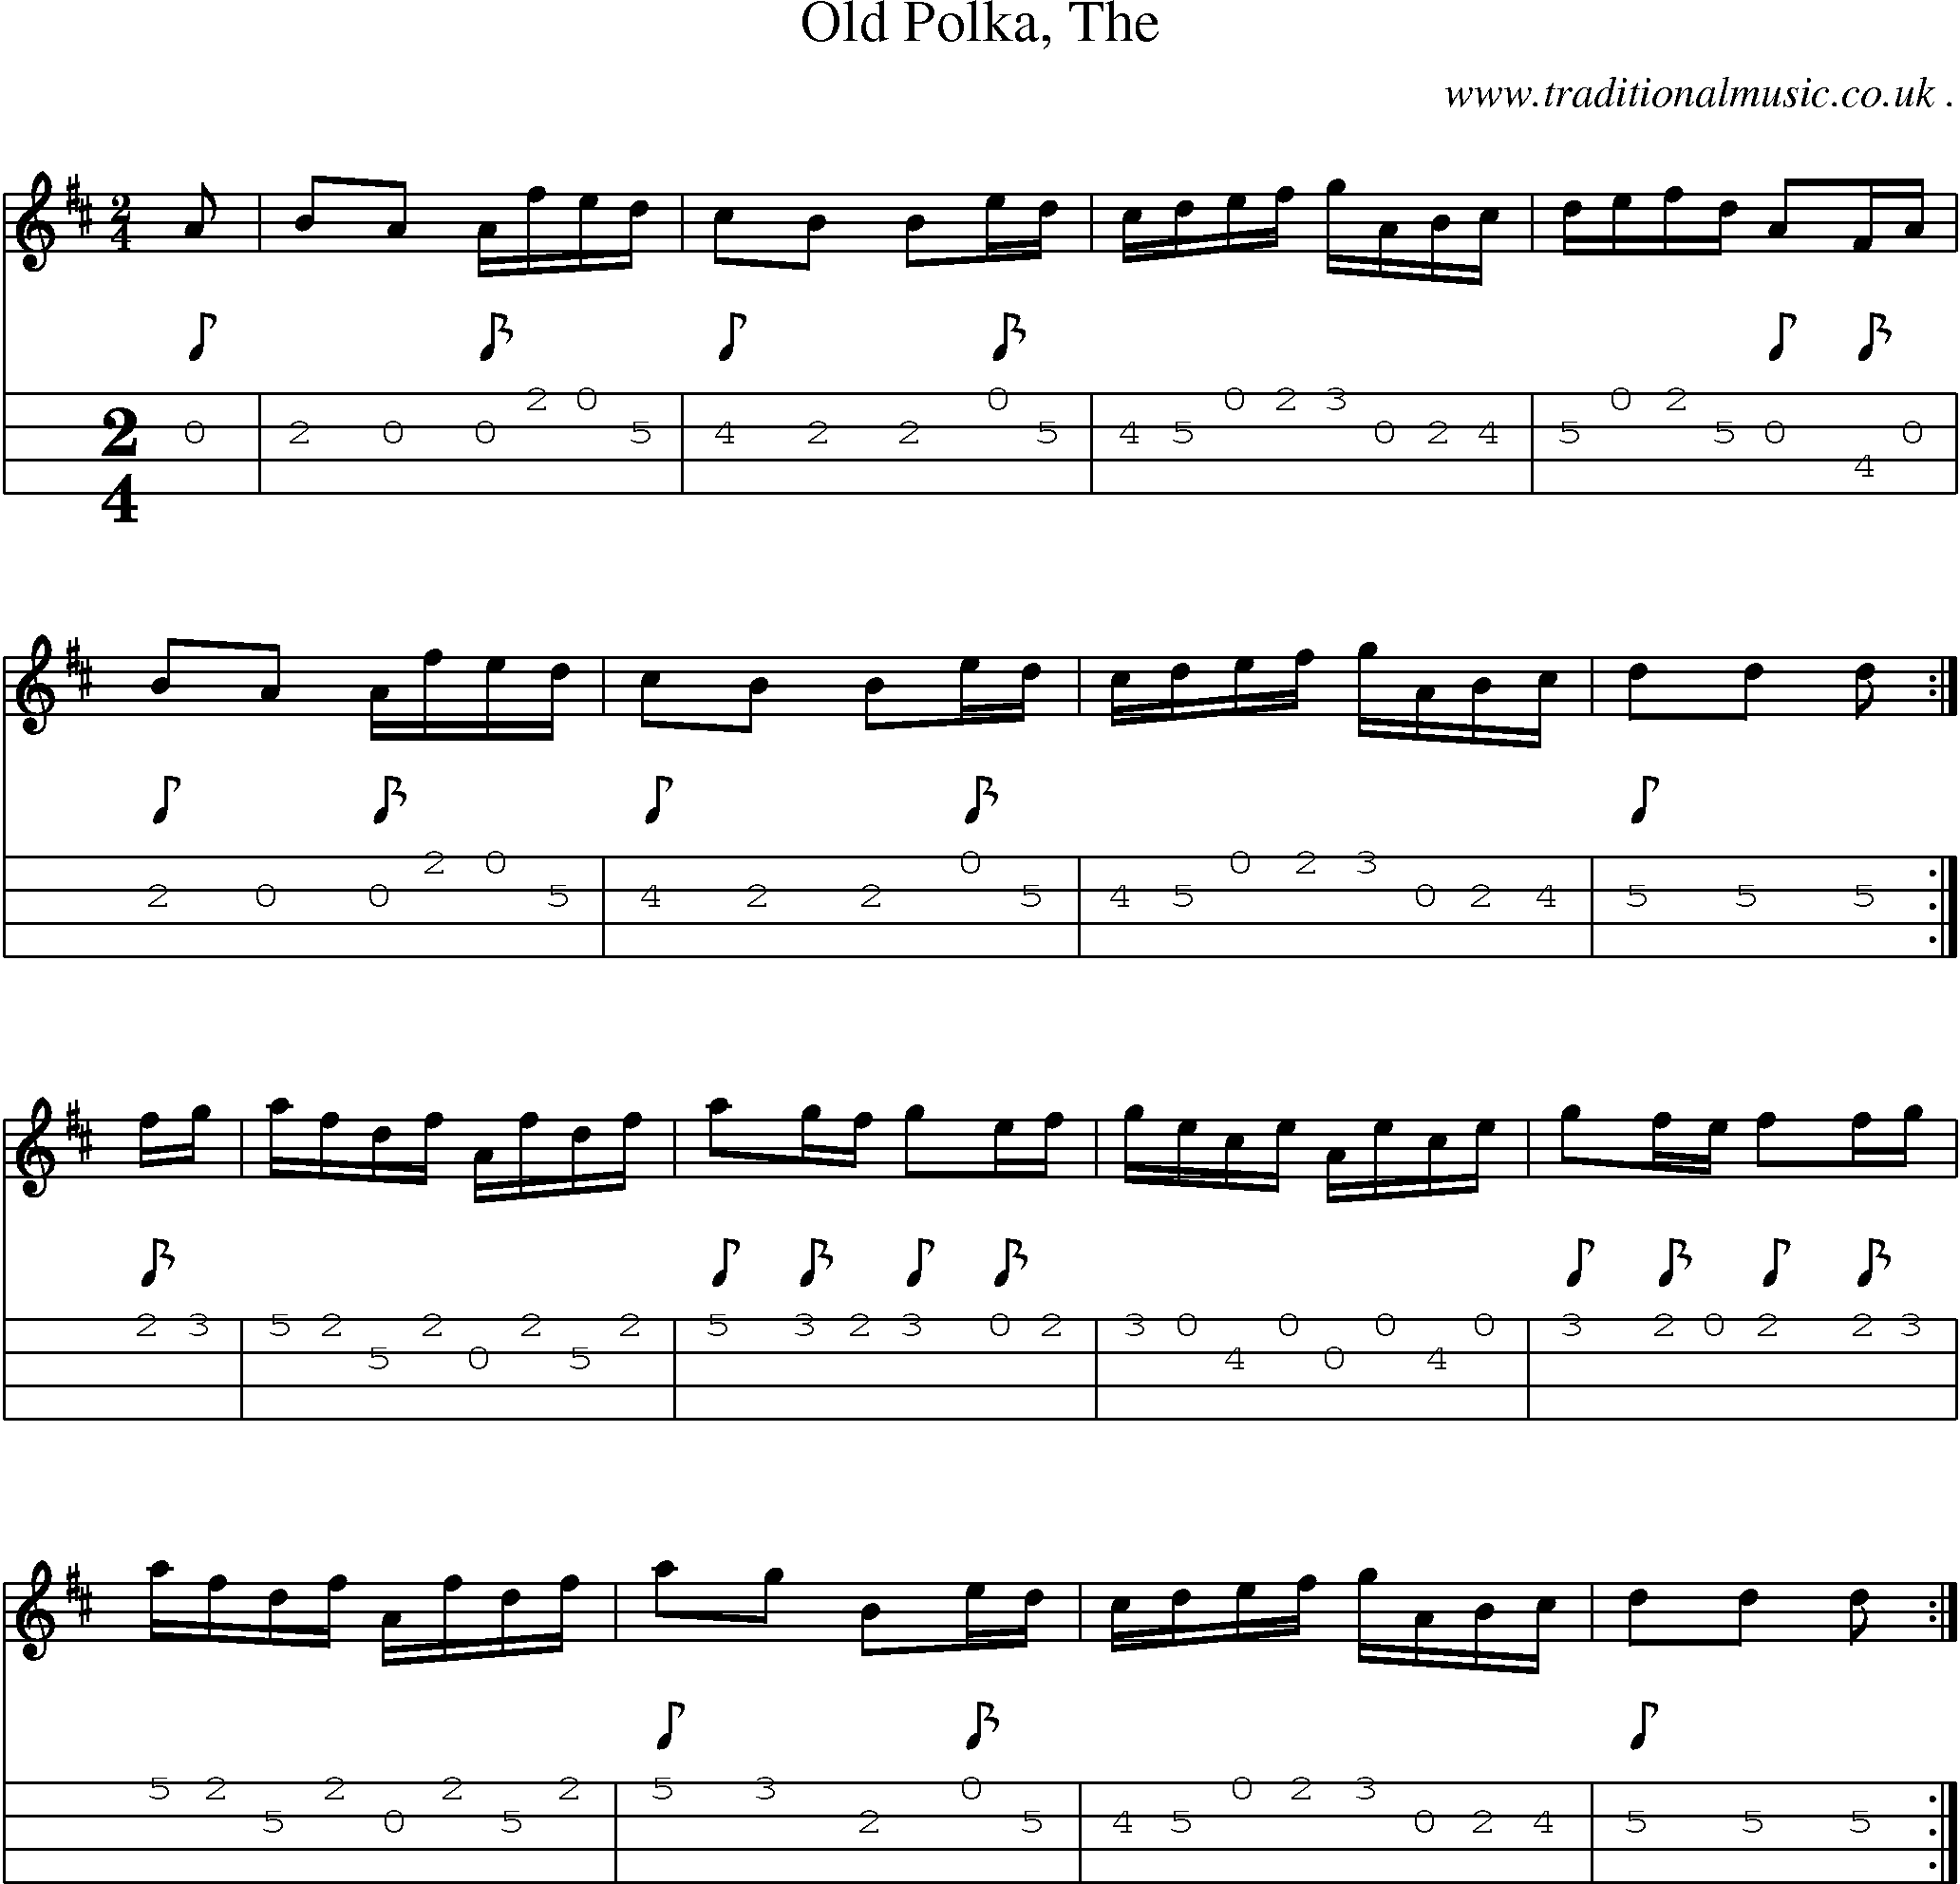 Sheet-music  score, Chords and Mandolin Tabs for Old Polka The